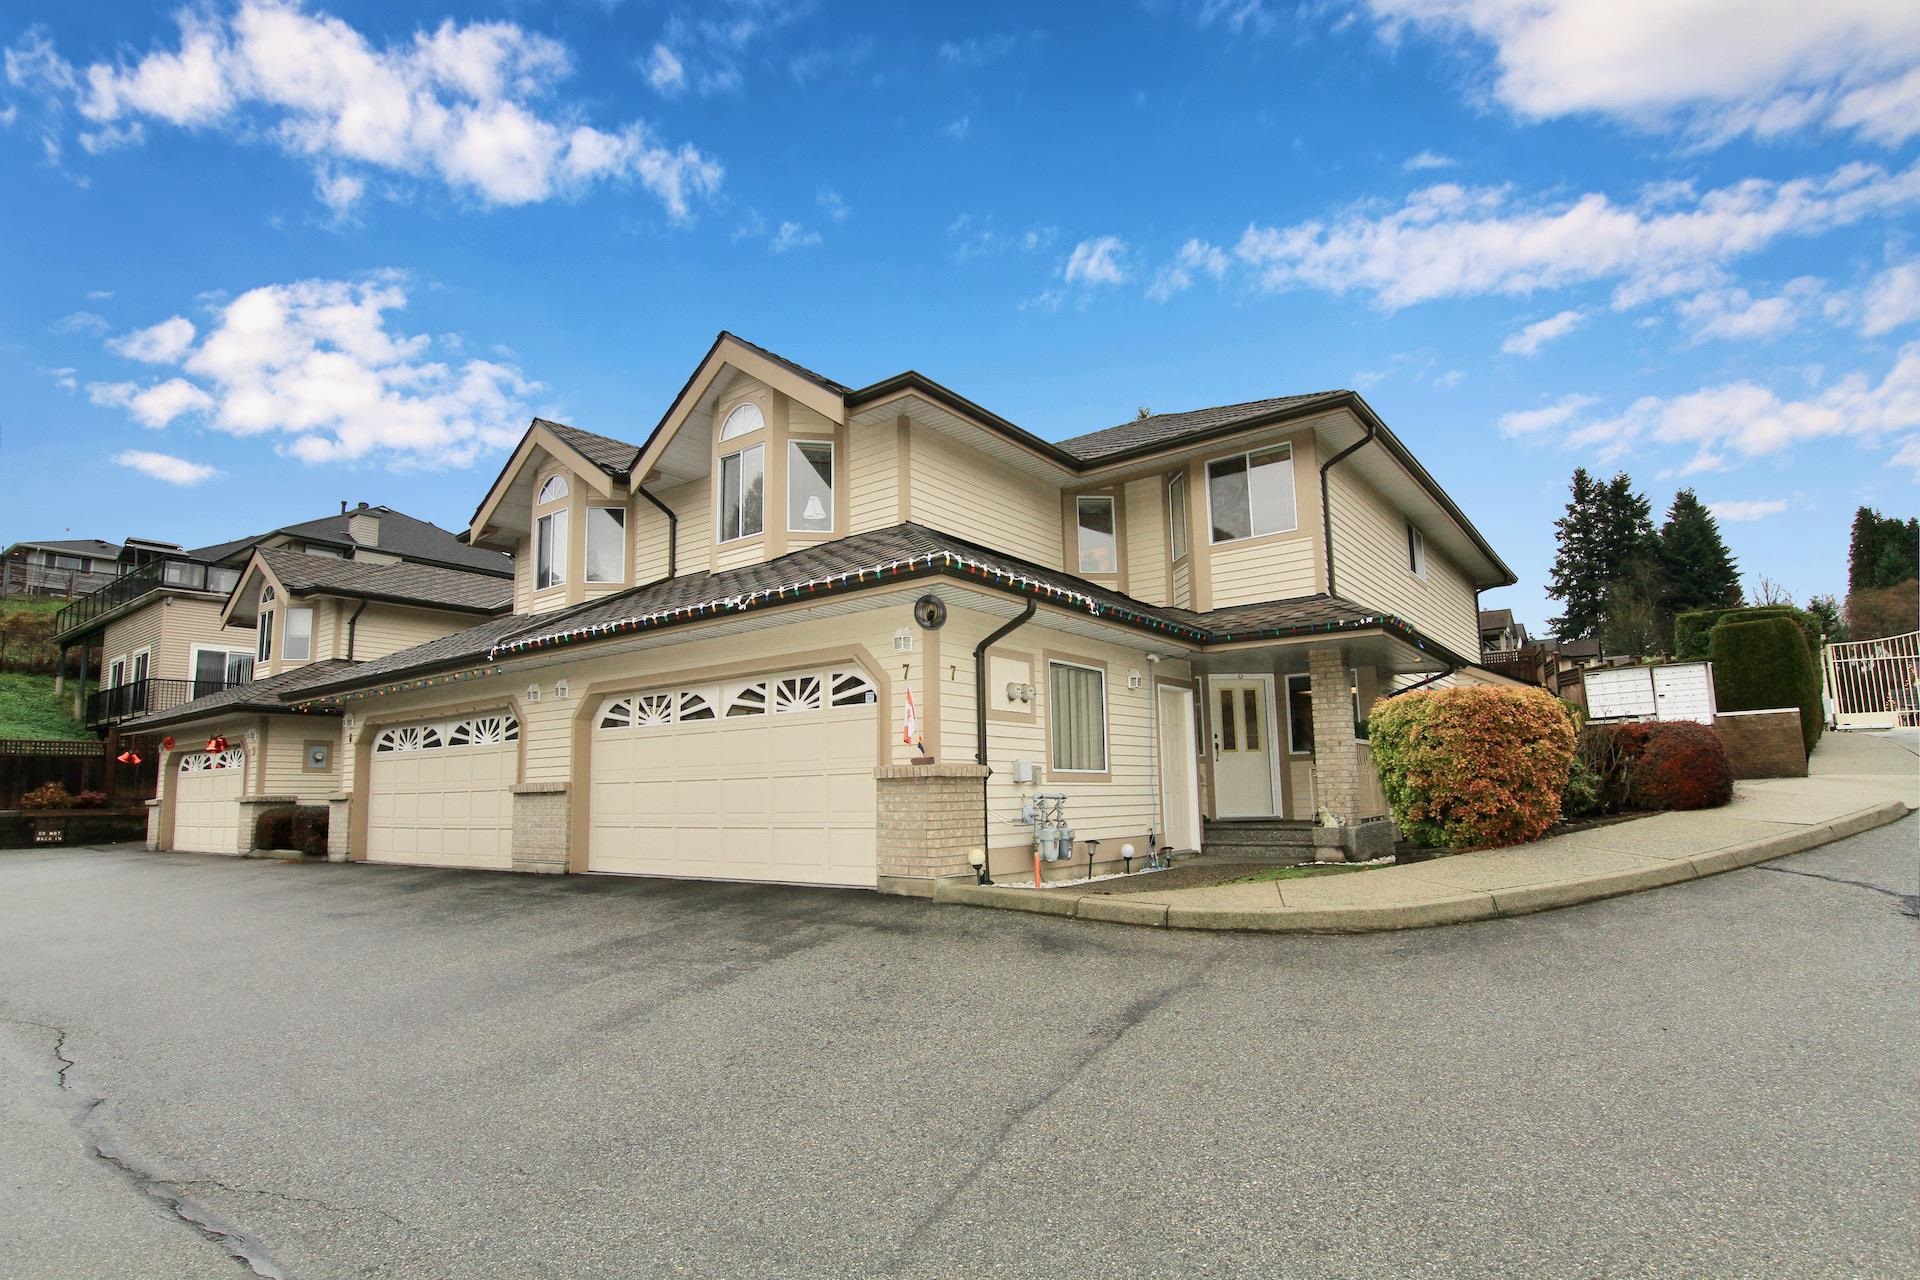 Maple Ridge, BC Real Estate Listings & Houses for Sale - REW